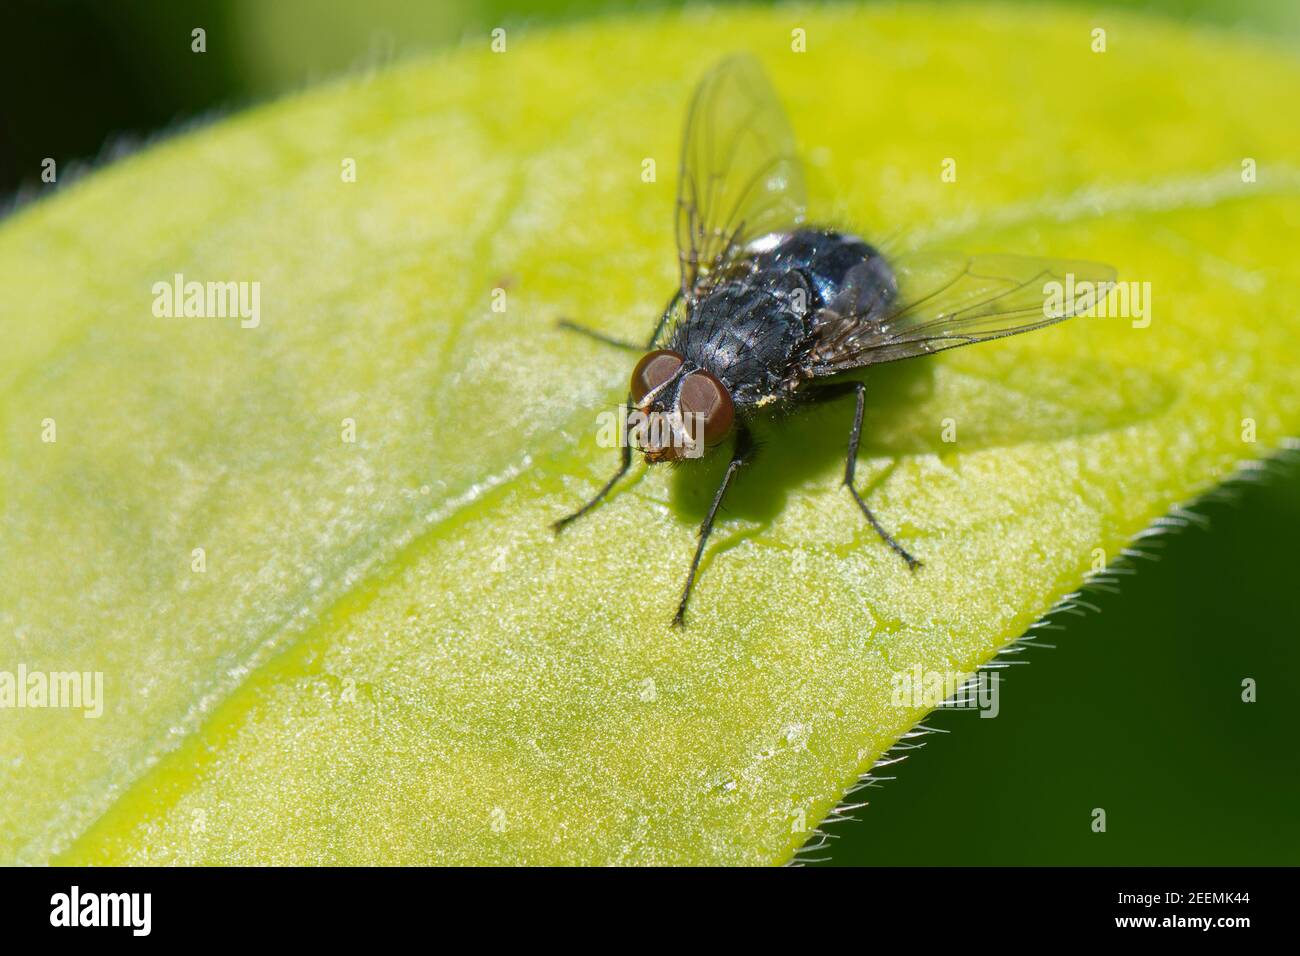 Common bluebottle fly (Calliphora vicina) sunning on a leaf,  Wiltshire garden, UK, April. Stock Photo